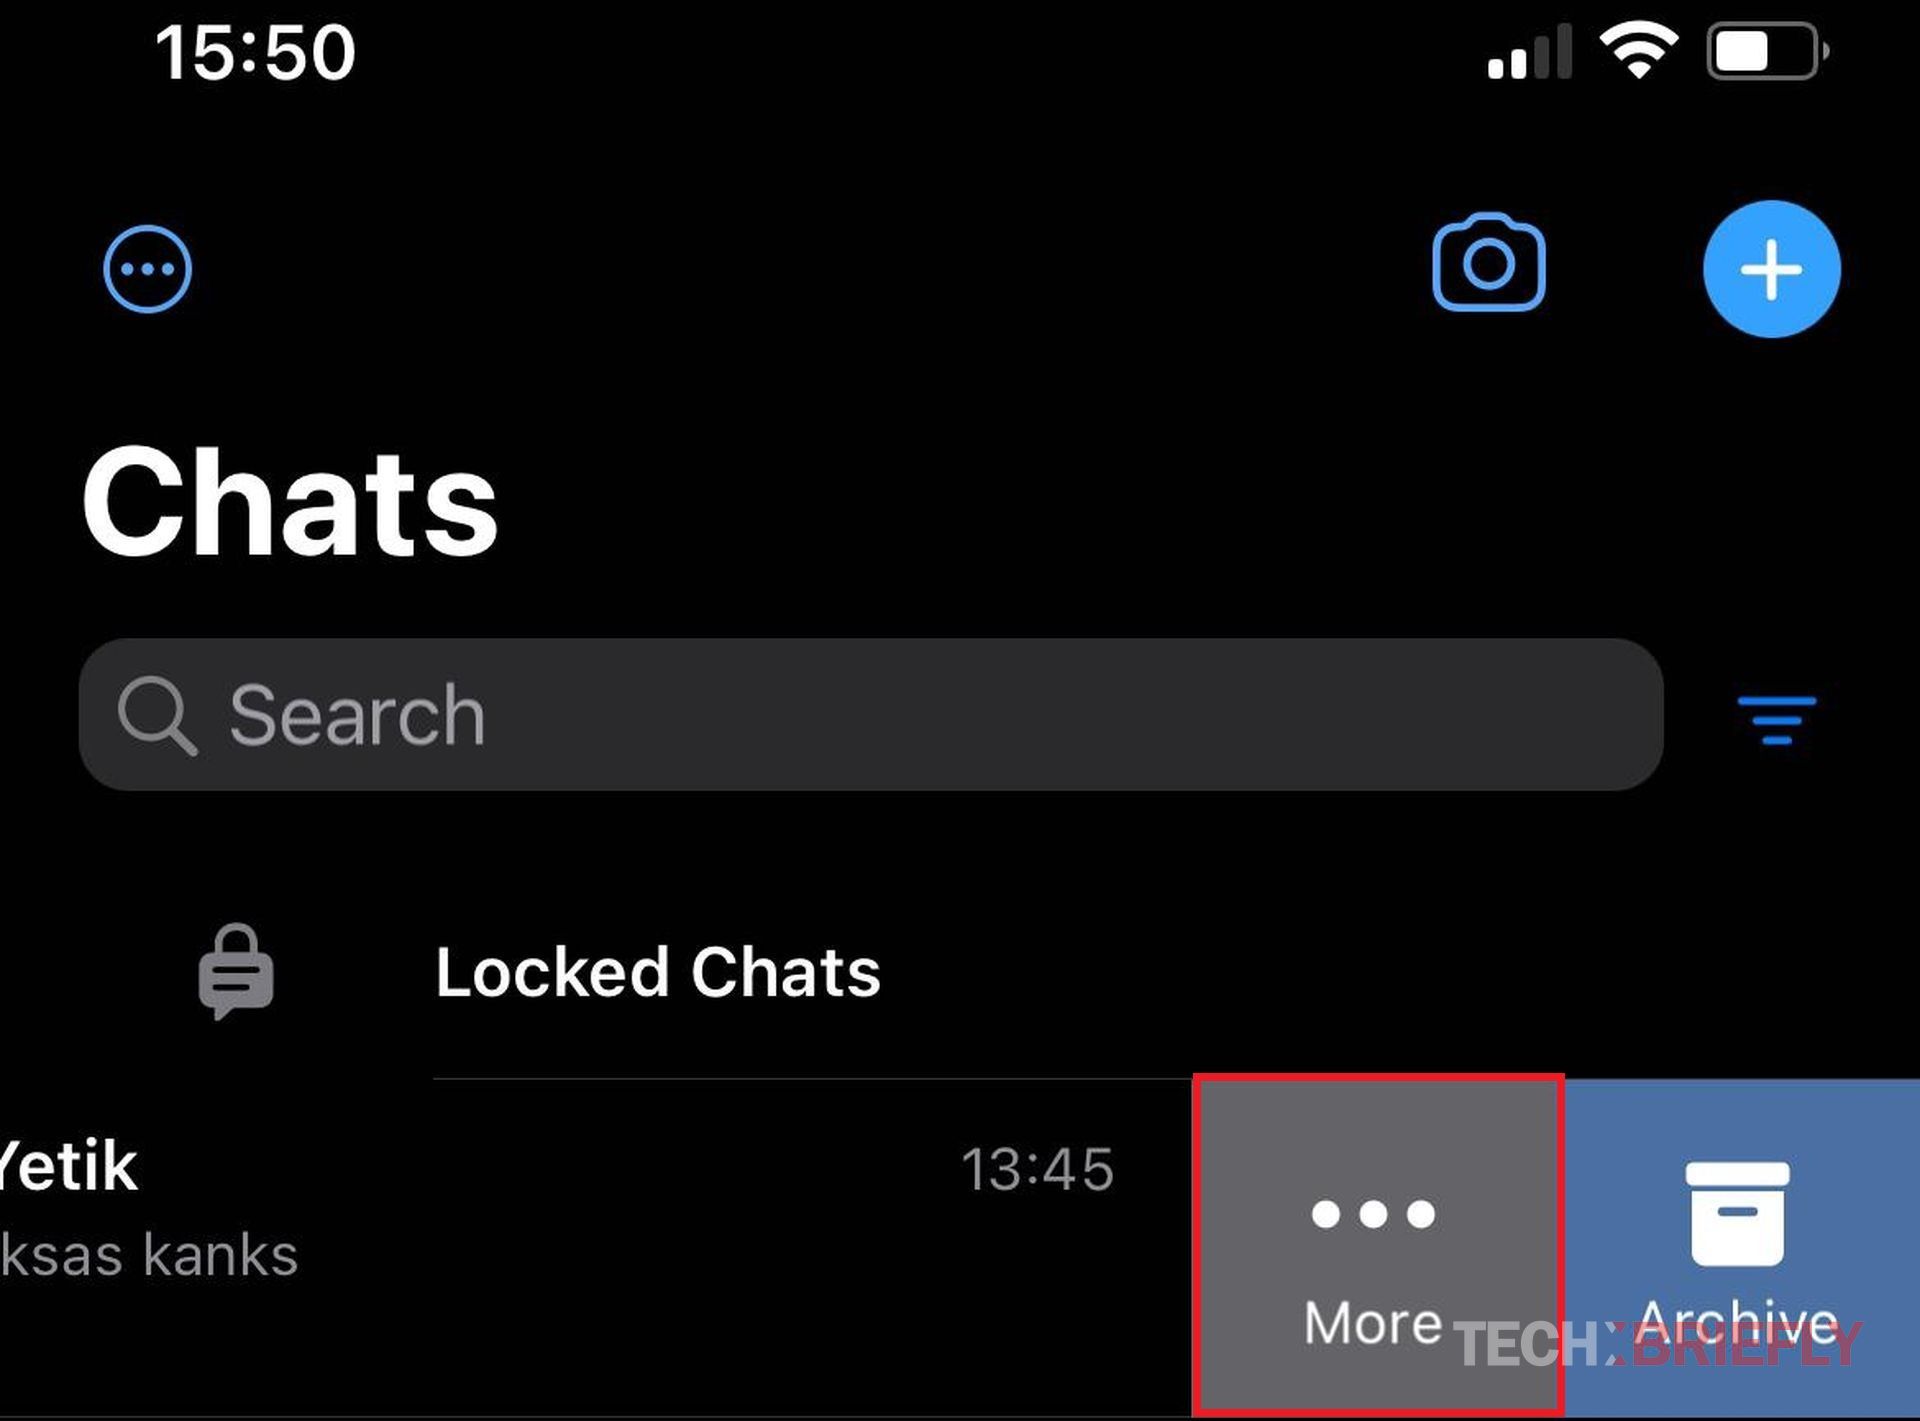 WhatsApp chat lock feature coming to linked devices